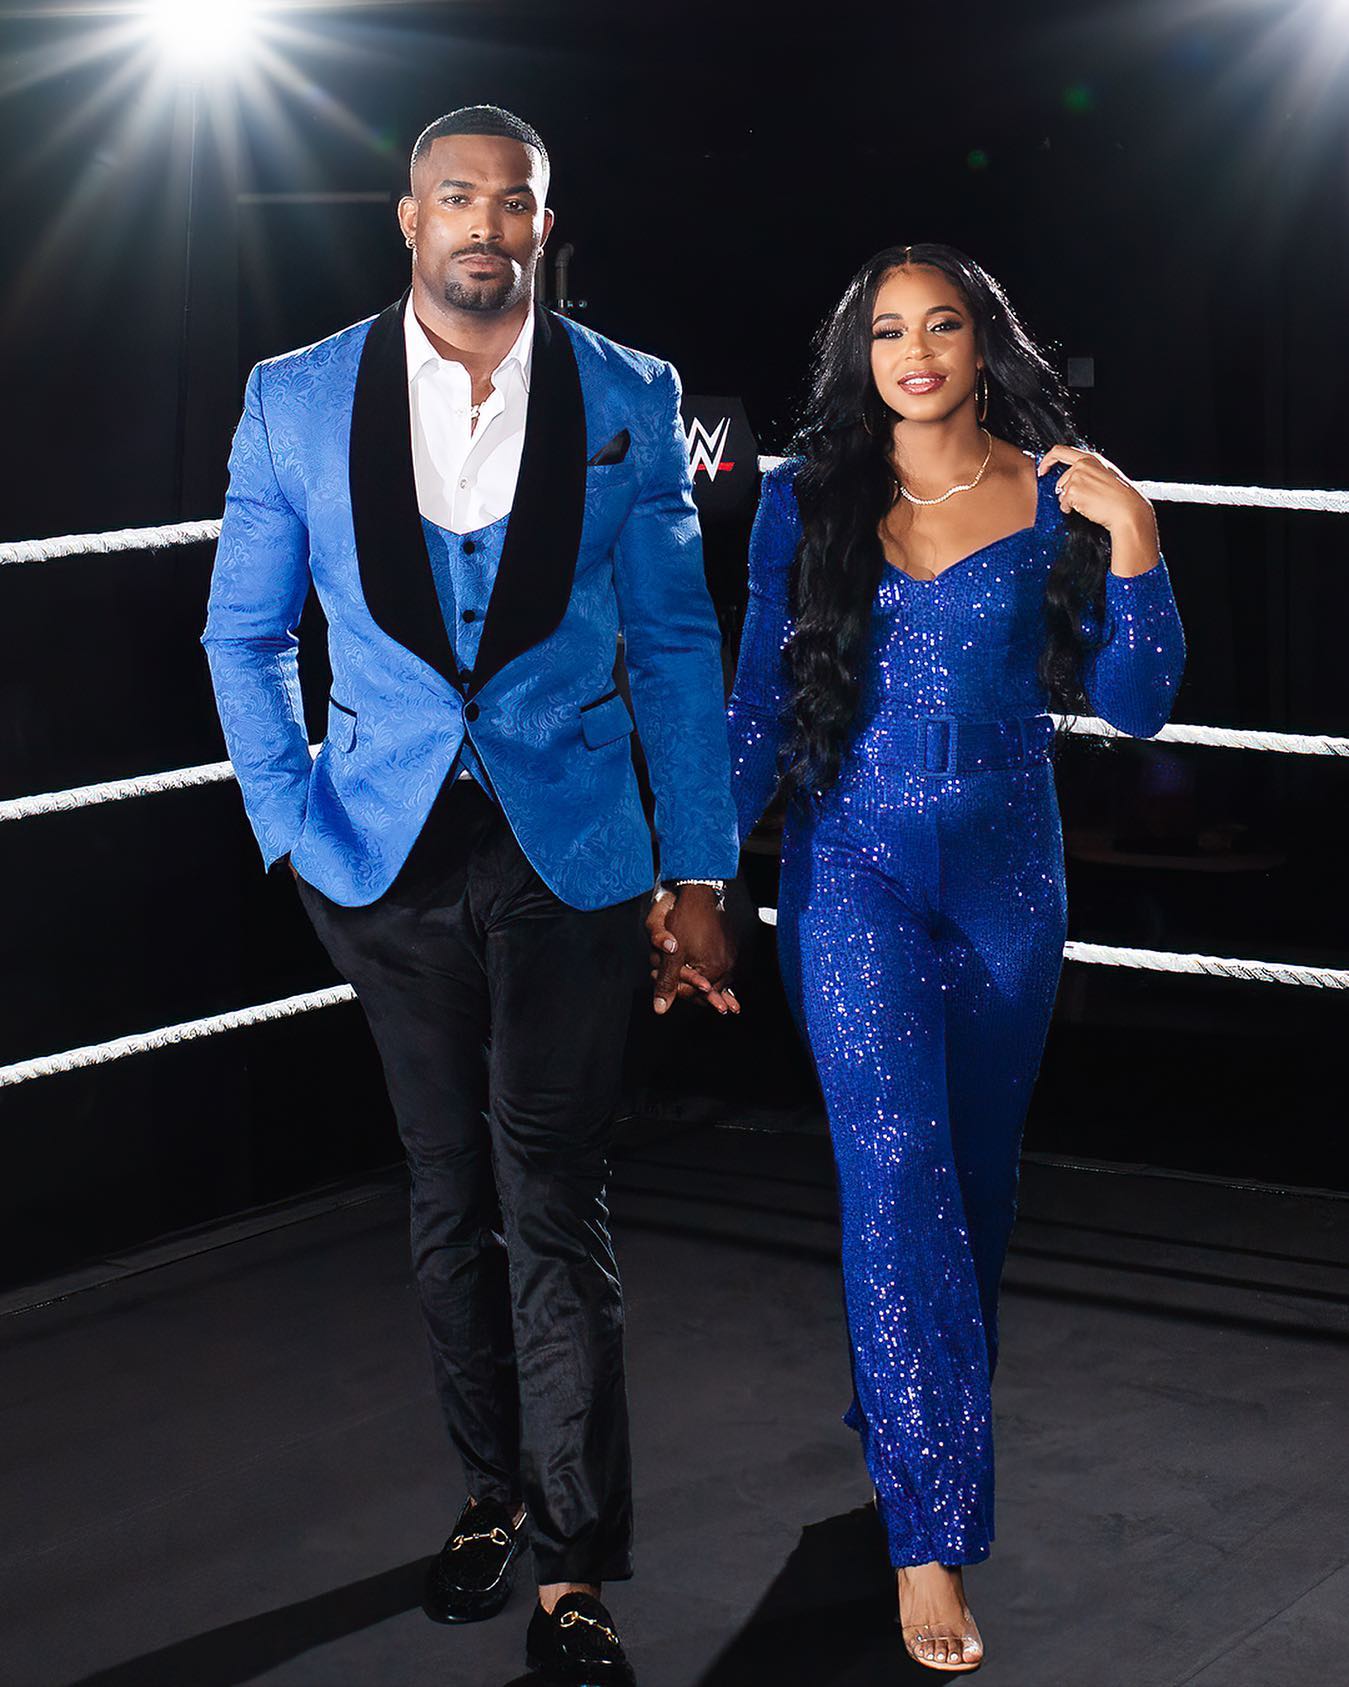 Bianca Belair and her husband, Montez Ford, photographed inside a WWE ring